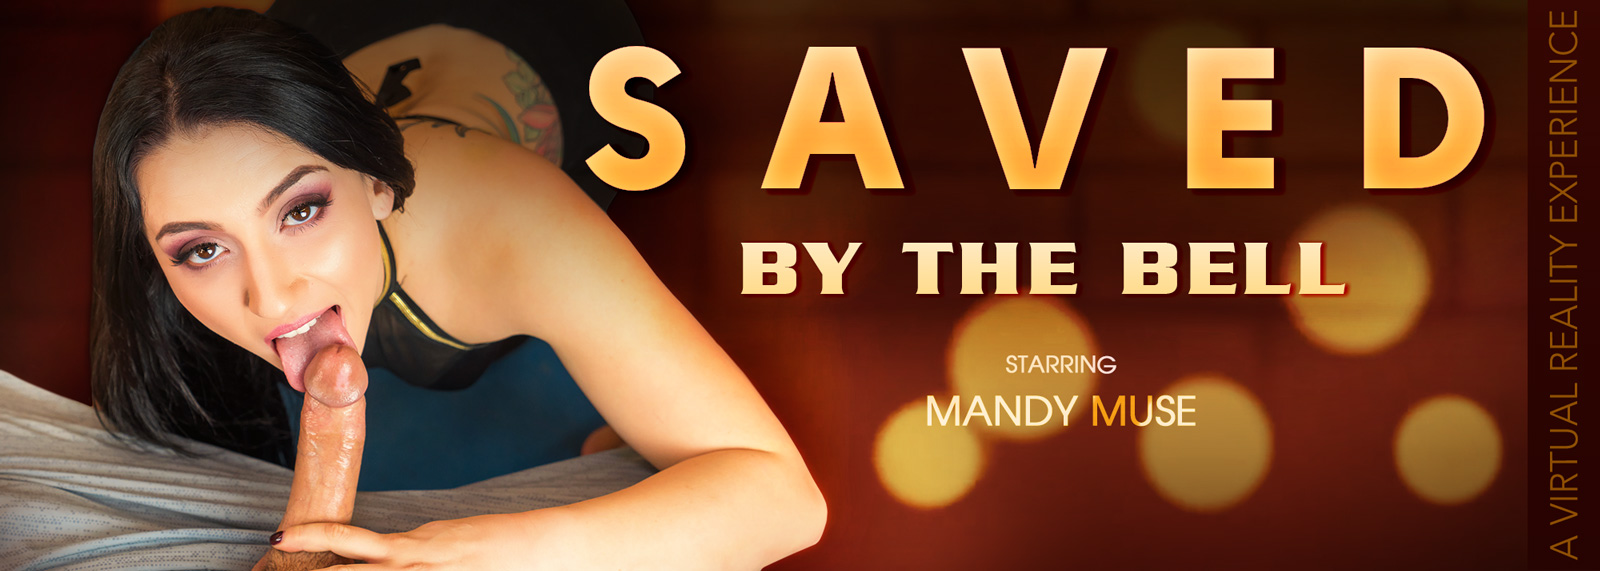 Saved by the Bell - VR Porn Video, Starring: Mandy Muse